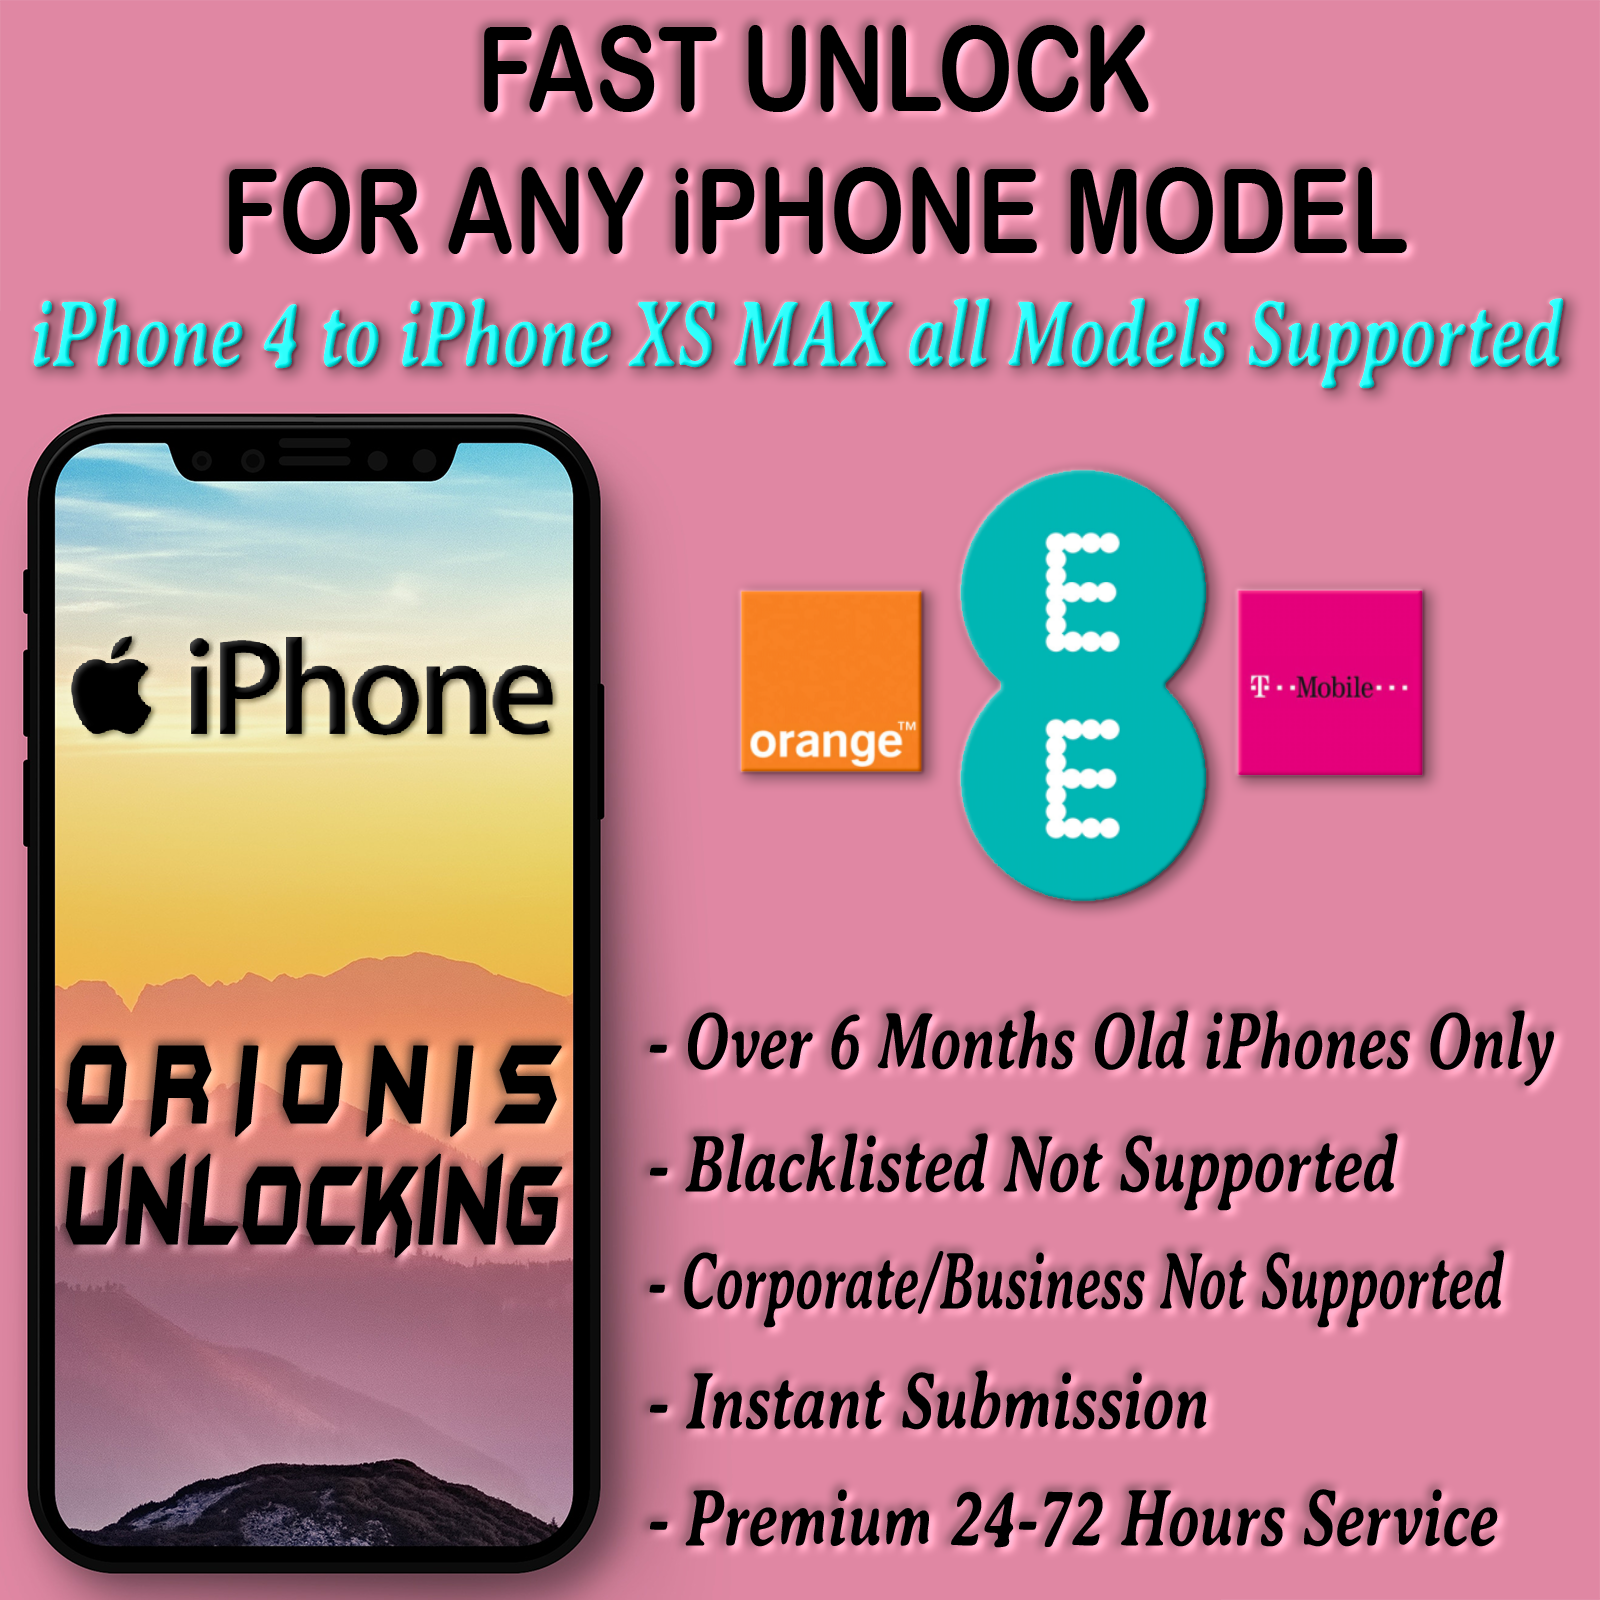 UK EE Orange T-Mobile iPhone (all iPhone Over 6 Months Used Only Supported)